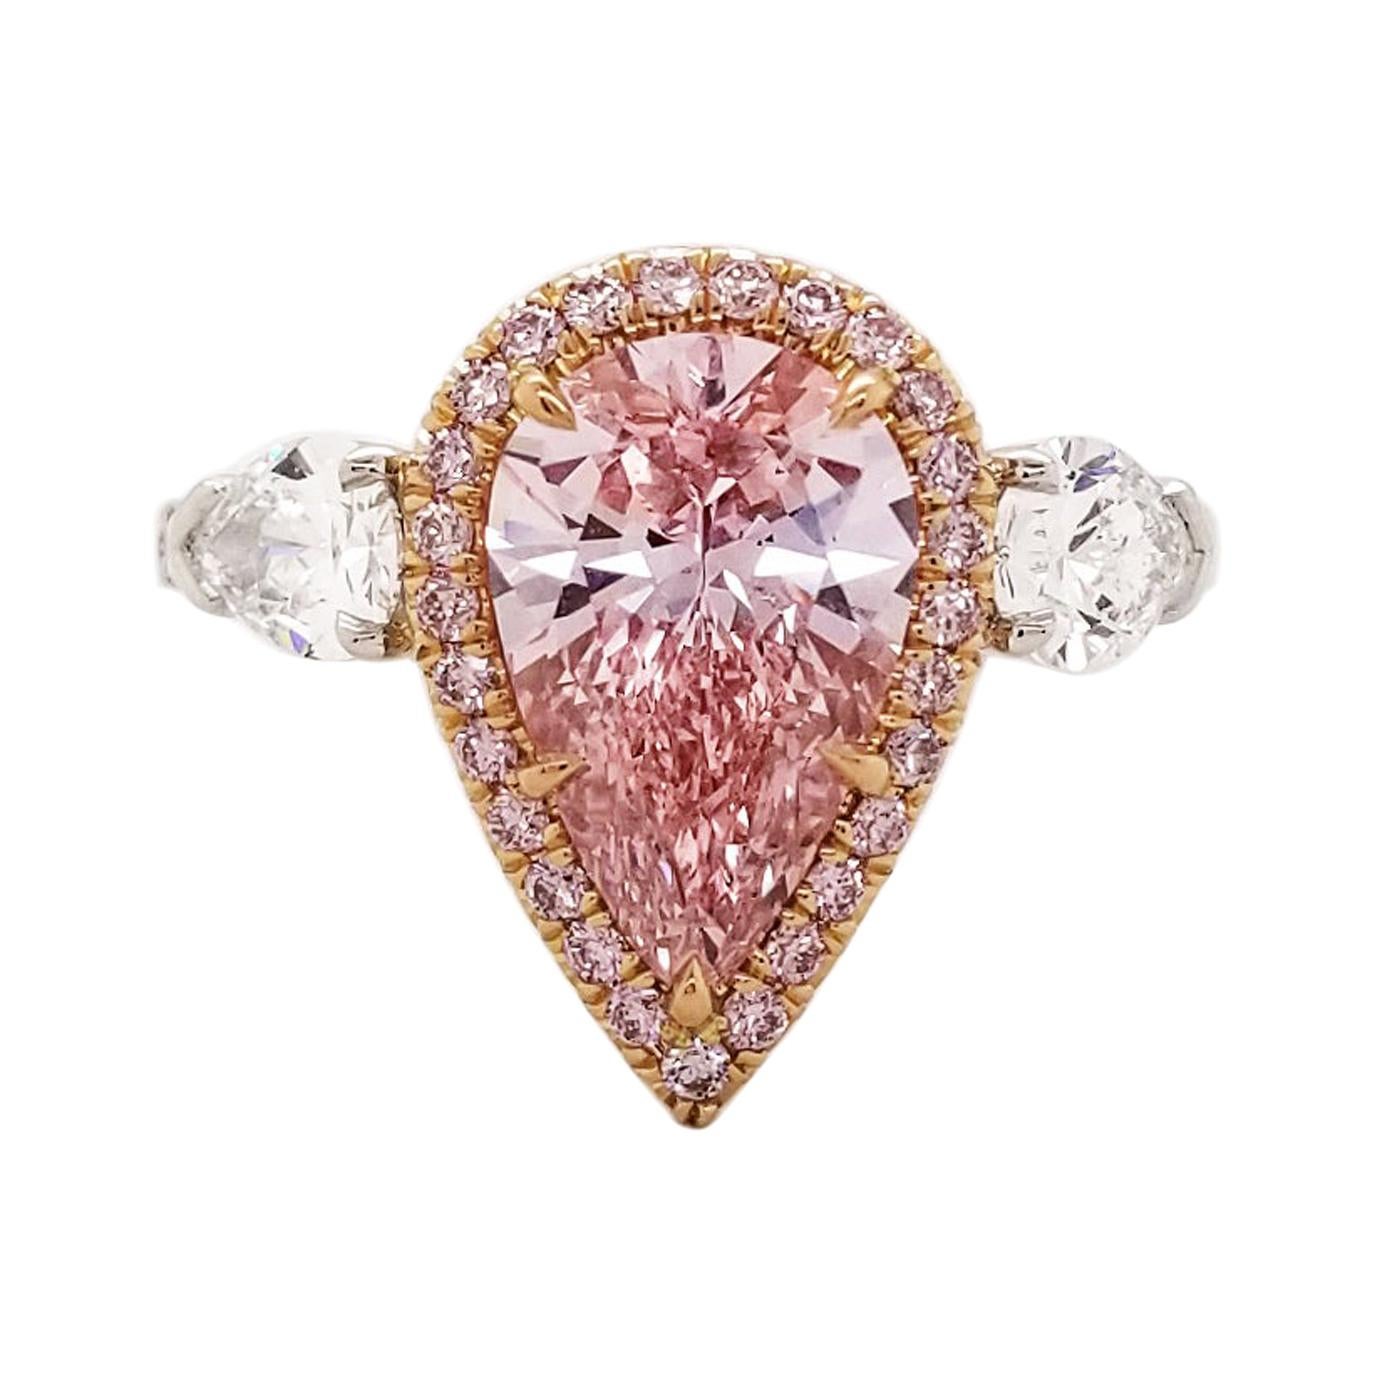 Scarselli 2 Carat Pear Shape Pink Diamond Ring in Platinum and 18k Goldralds